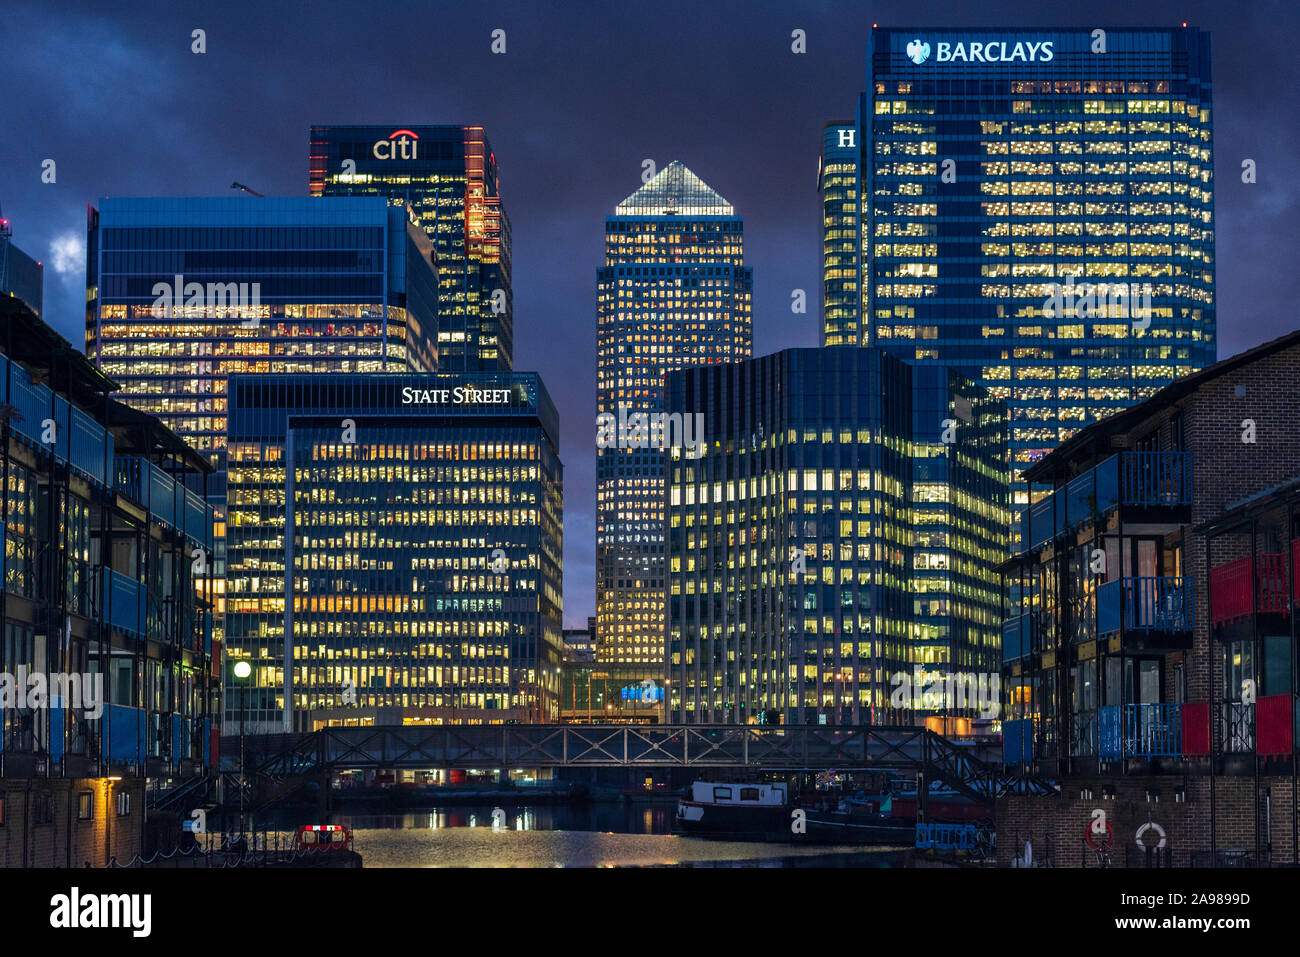 London Banks - Canary Wharf Banks and other financial services offices in London's Canary Wharf Stock Photo